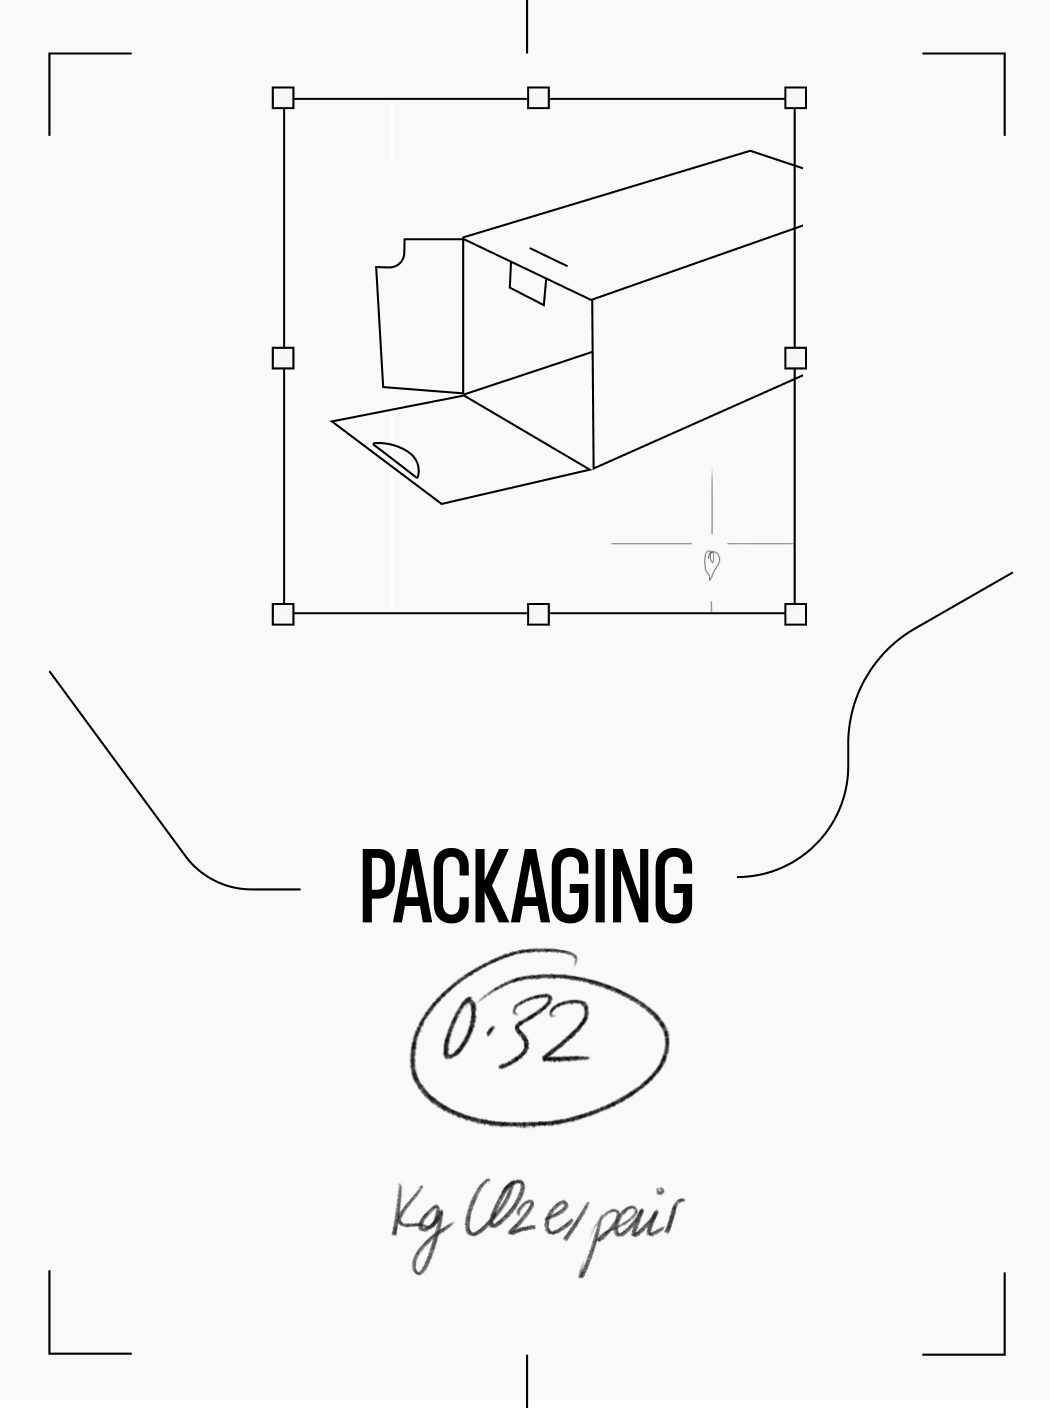 a drawing of the packaging